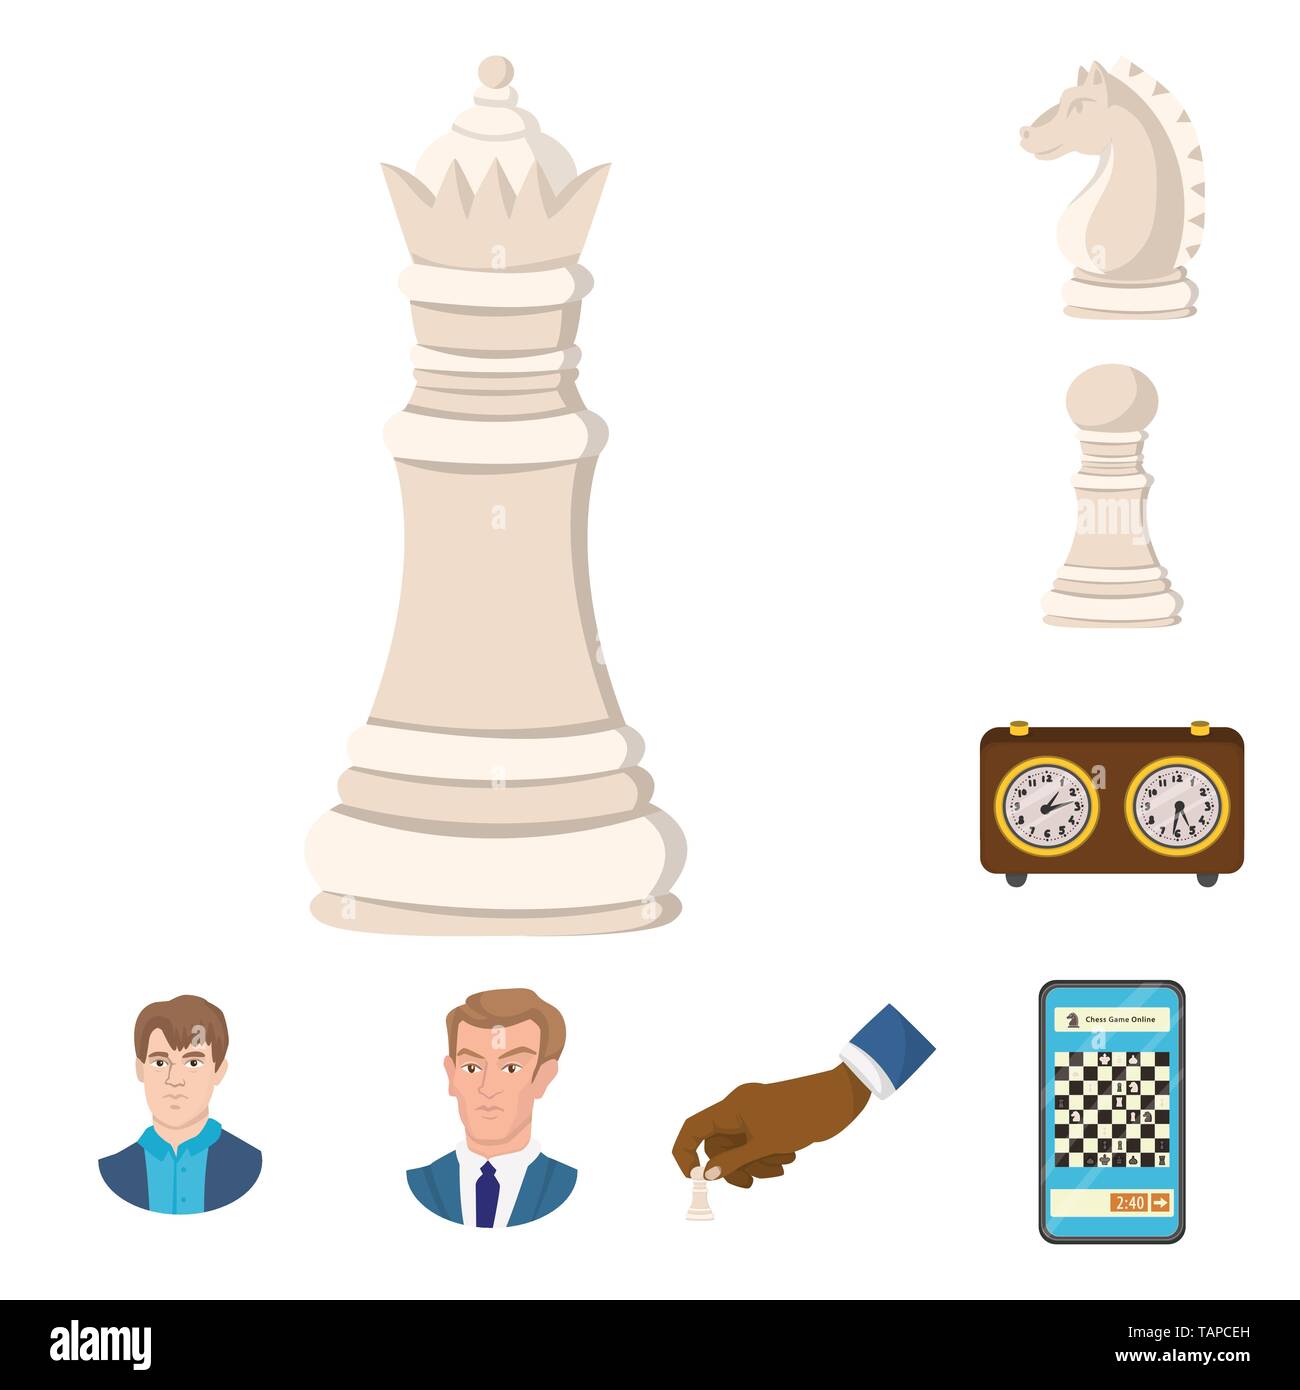 queen,knight,pawn,clock,man,hand,mobile,board,horse,timer,face,businessman,app,white,speed,male,profile,concept,phone,mate,figure,young,business,technology,check,head,counter,button,chess,game,piece,strategy,tactical,play,checkmate,thin,club,target,set,vector,icon,illustration,isolated,collection,design,element,graphic,sign,cartoon,color Vector Vectors , Stock Vector